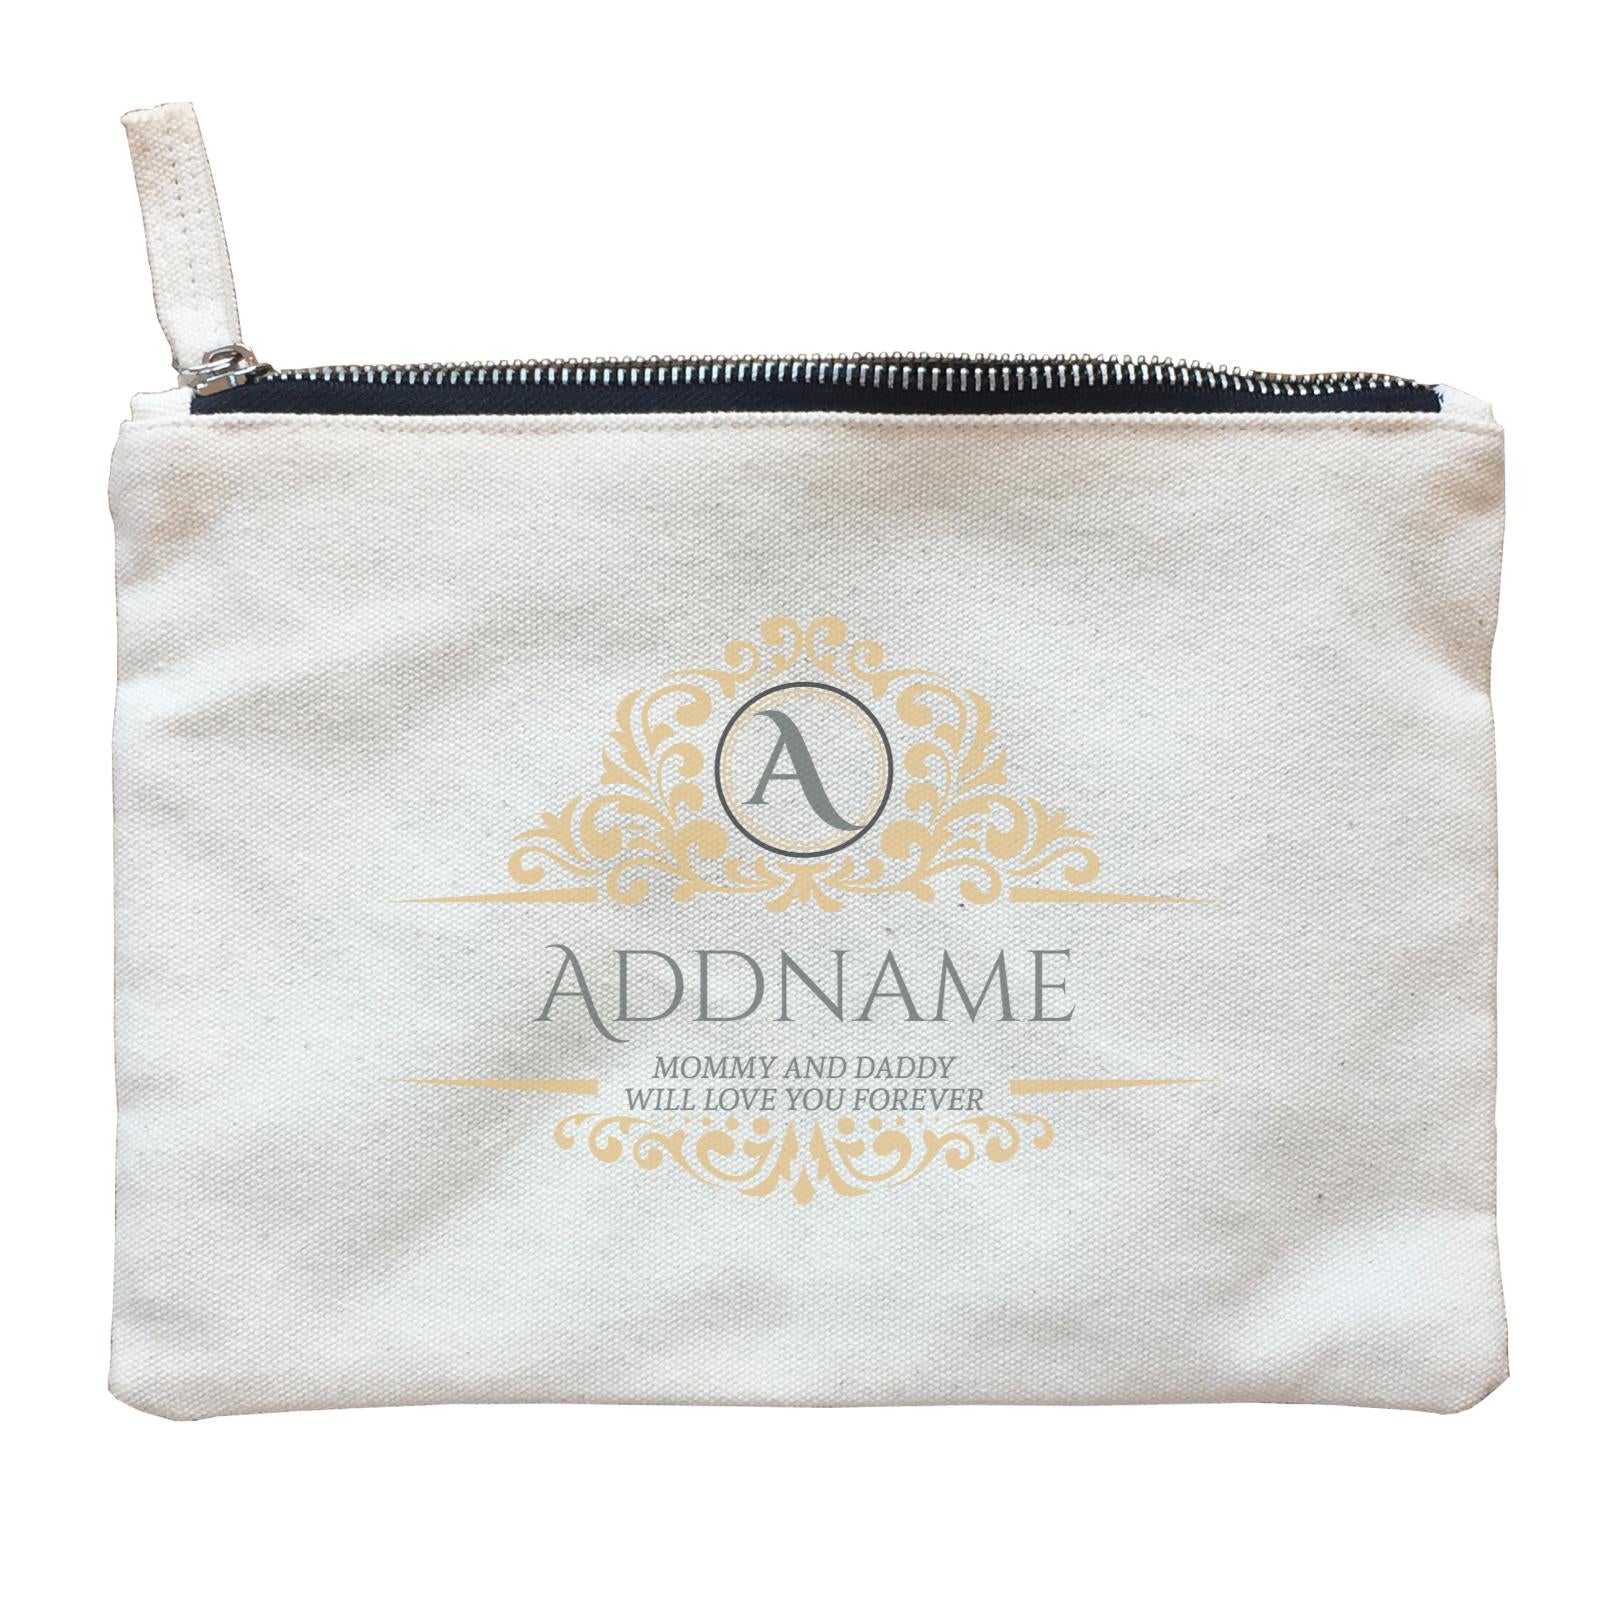 Royal Emblem Personalizable with Initial Name and Text Zipper Pouch